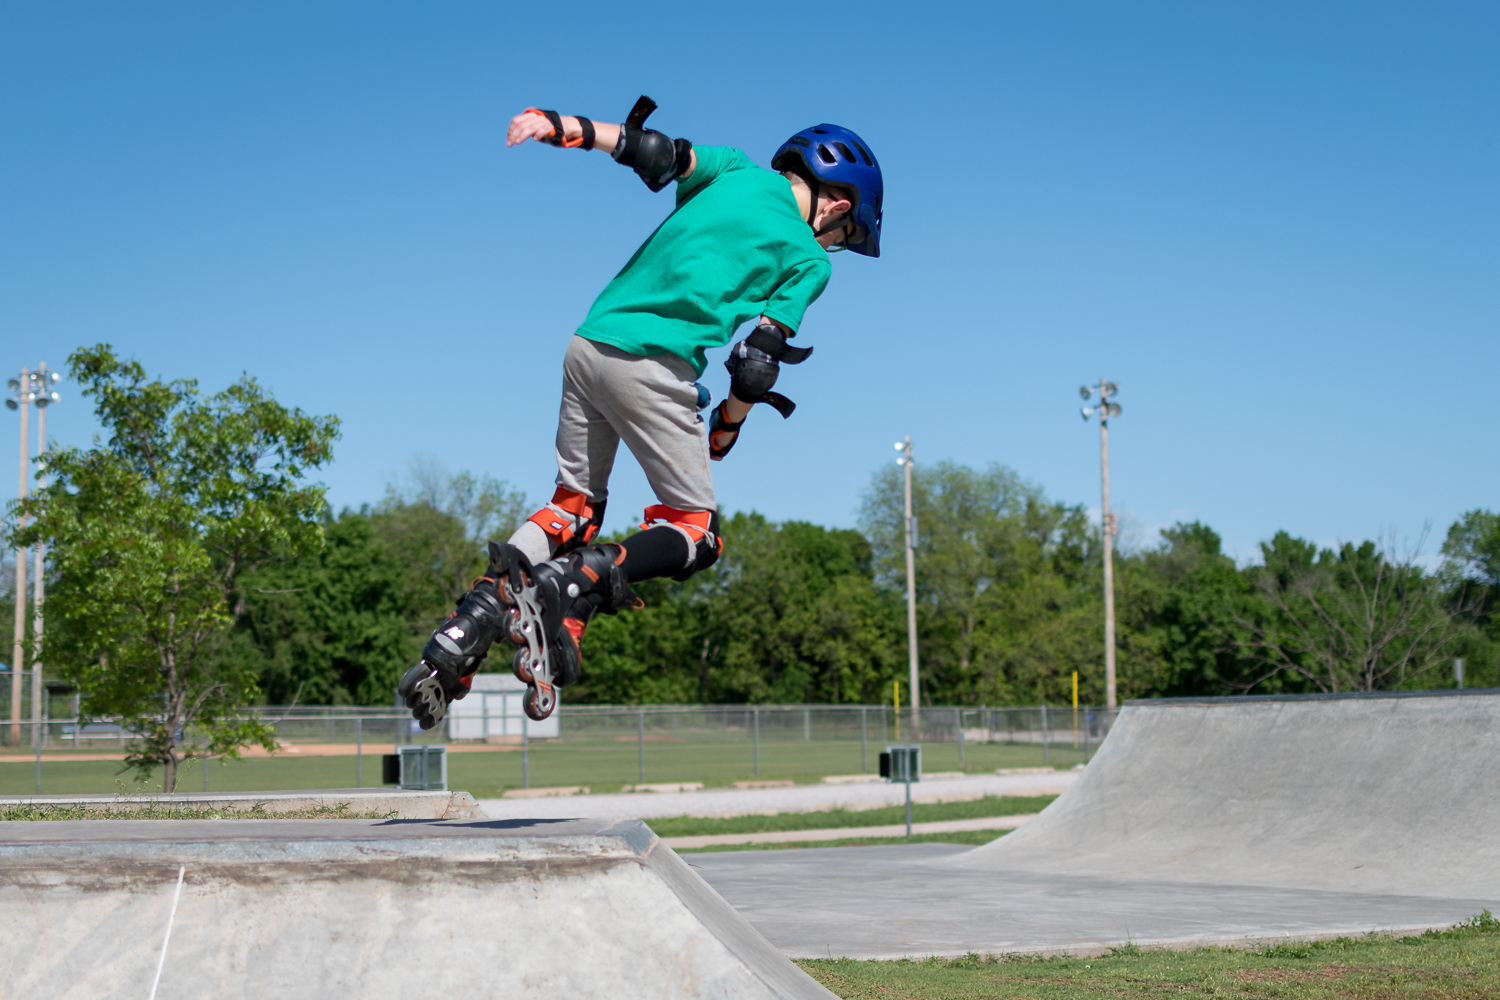 JPEG vs HEIC: A child on rollerblades jumping over a ramp.